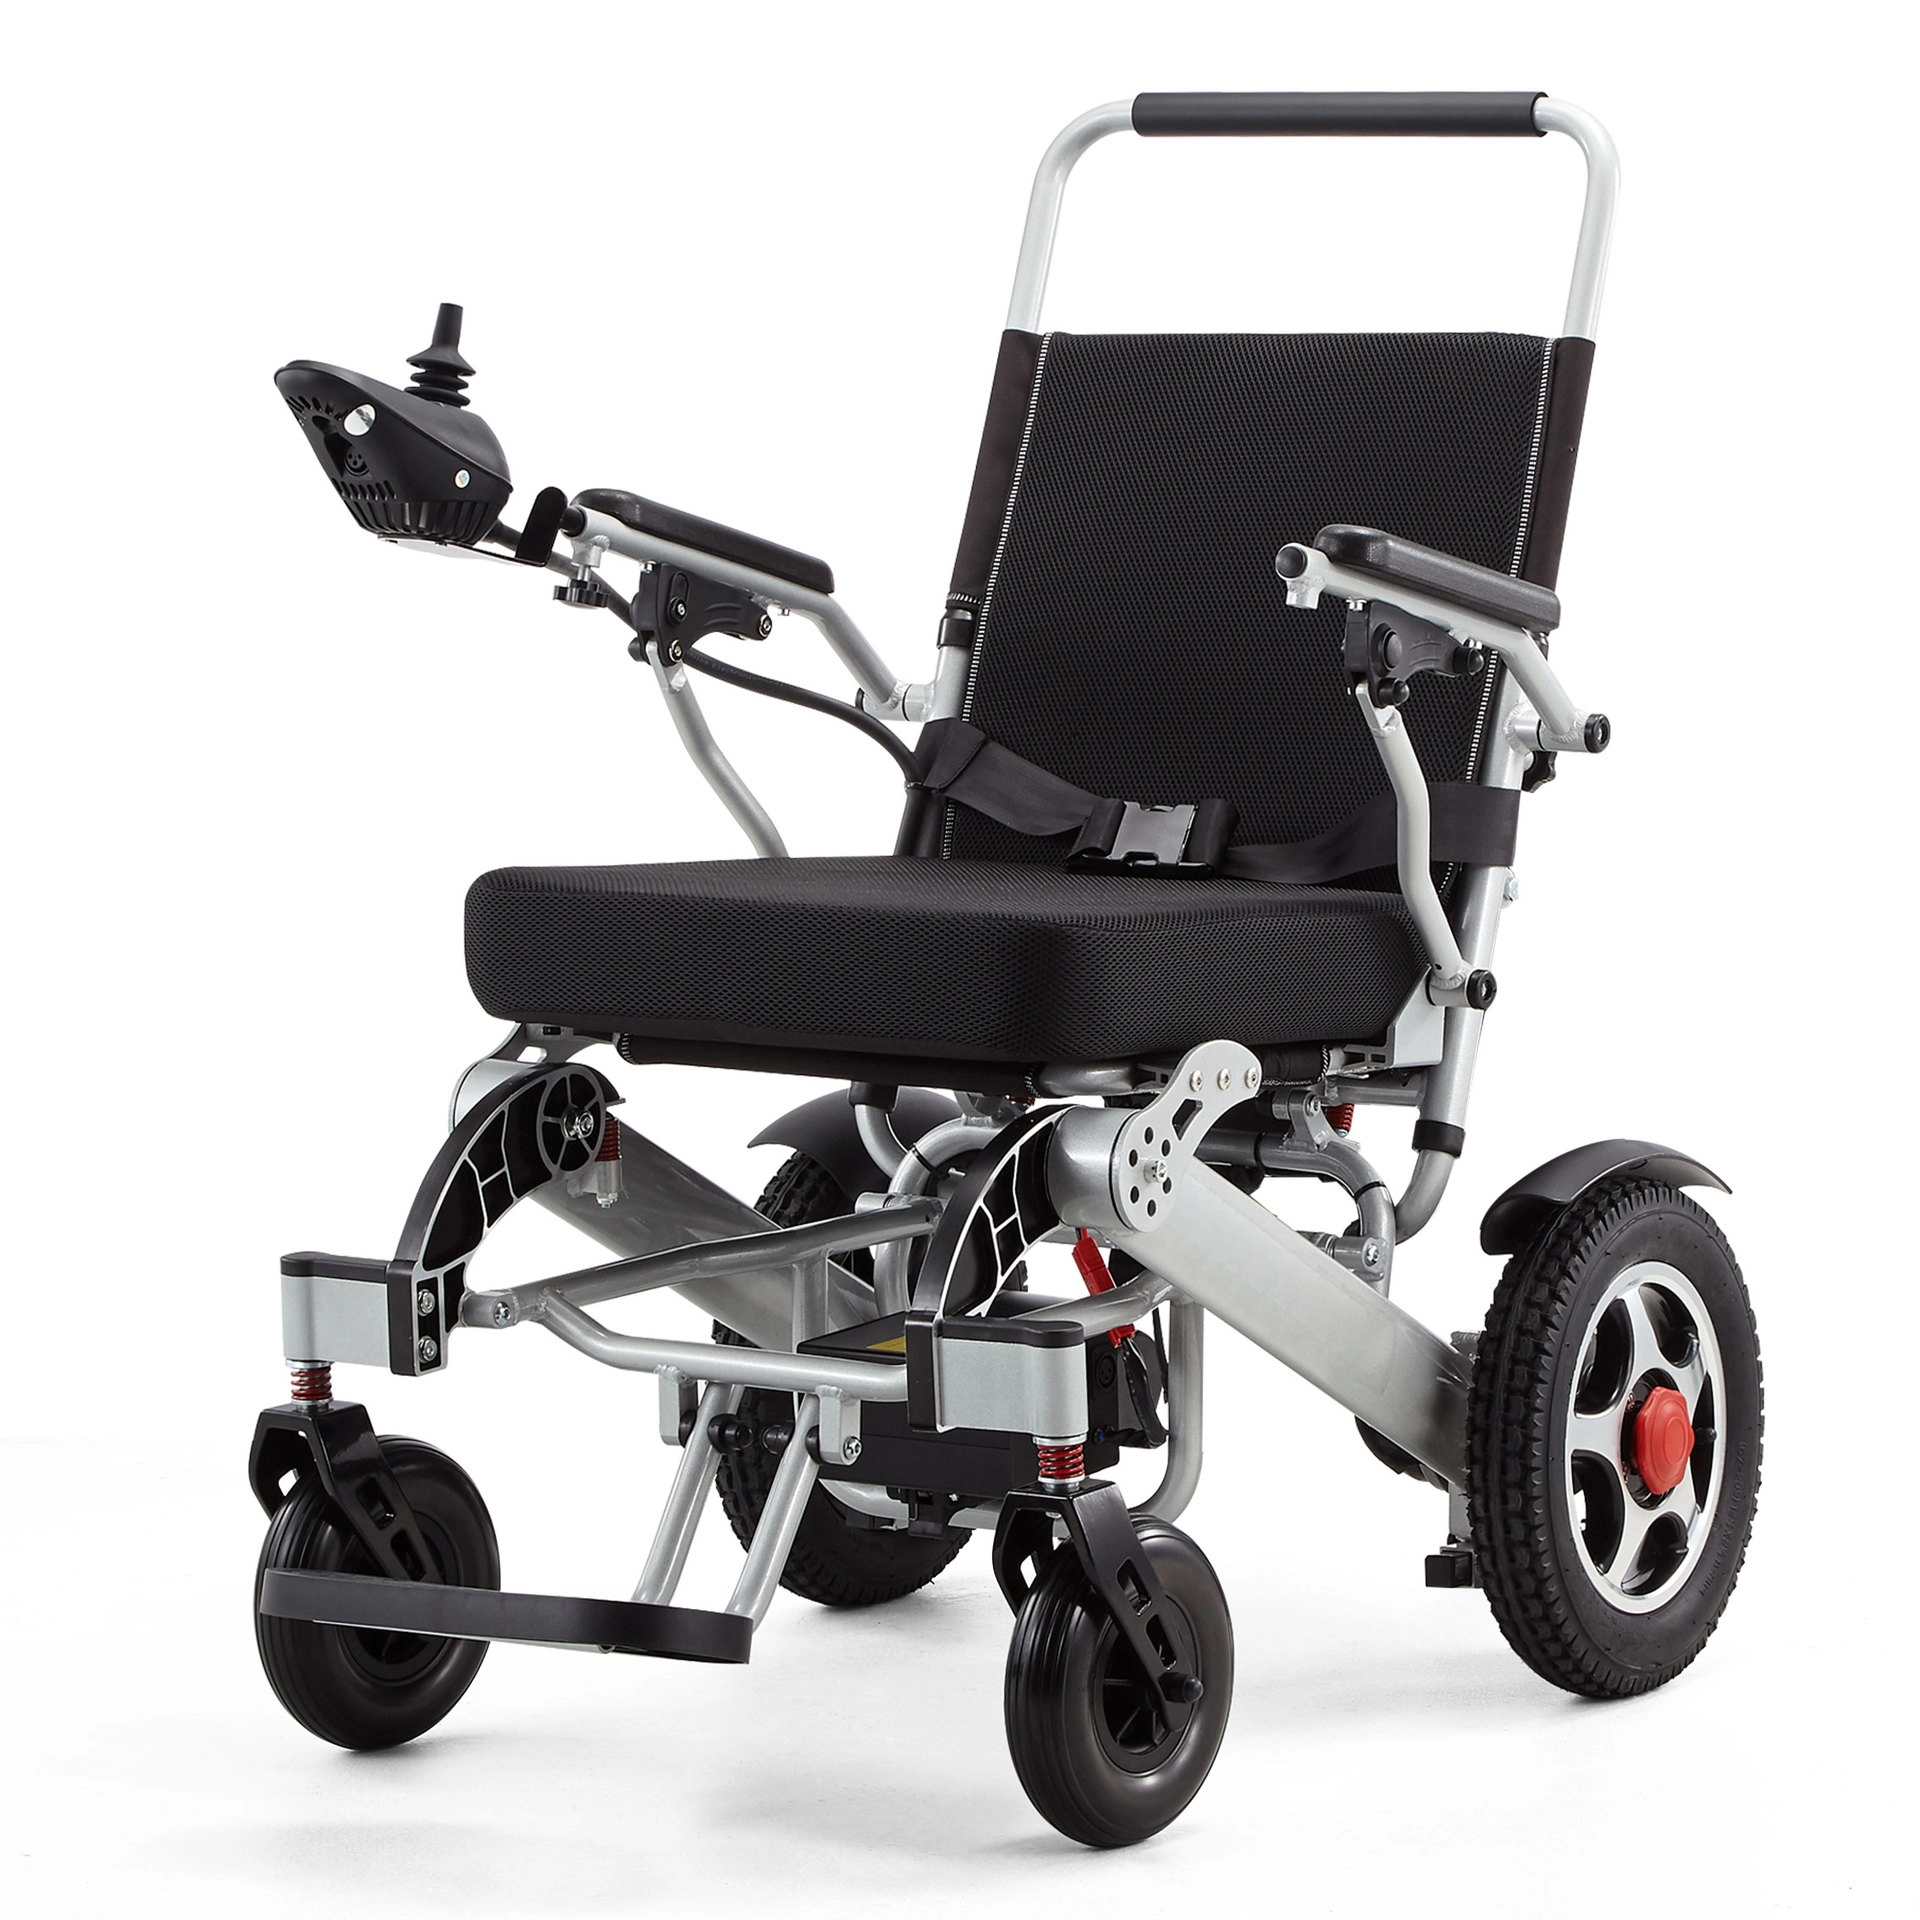 Disabled car moving hand bike foldable electric wheelchair